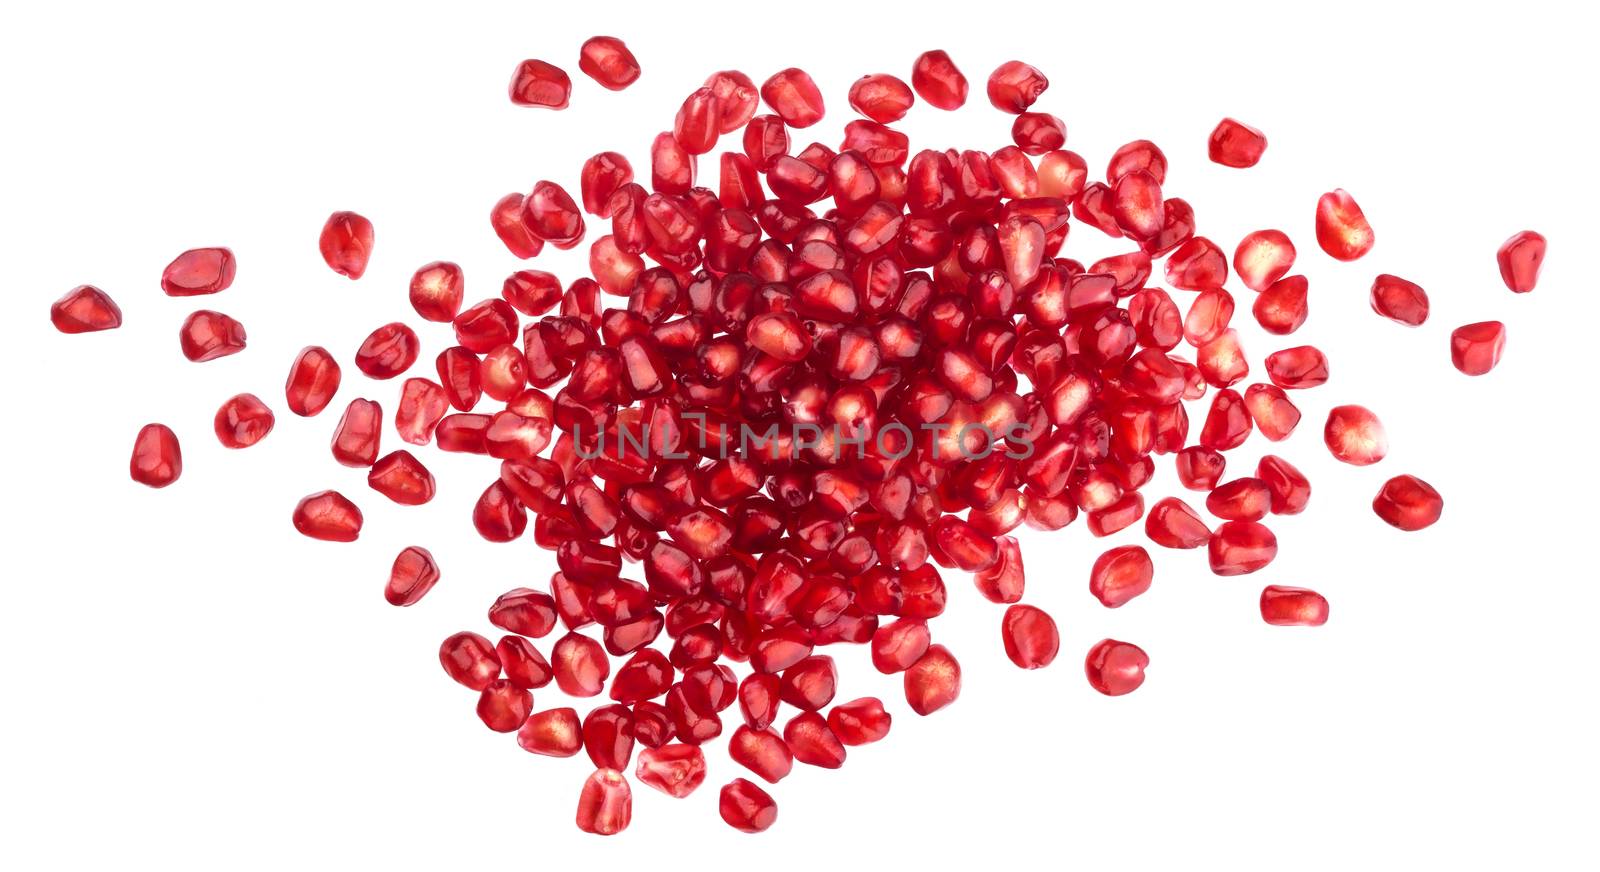 Pomegranate seeds isolated on white background, with empty space for text by xamtiw